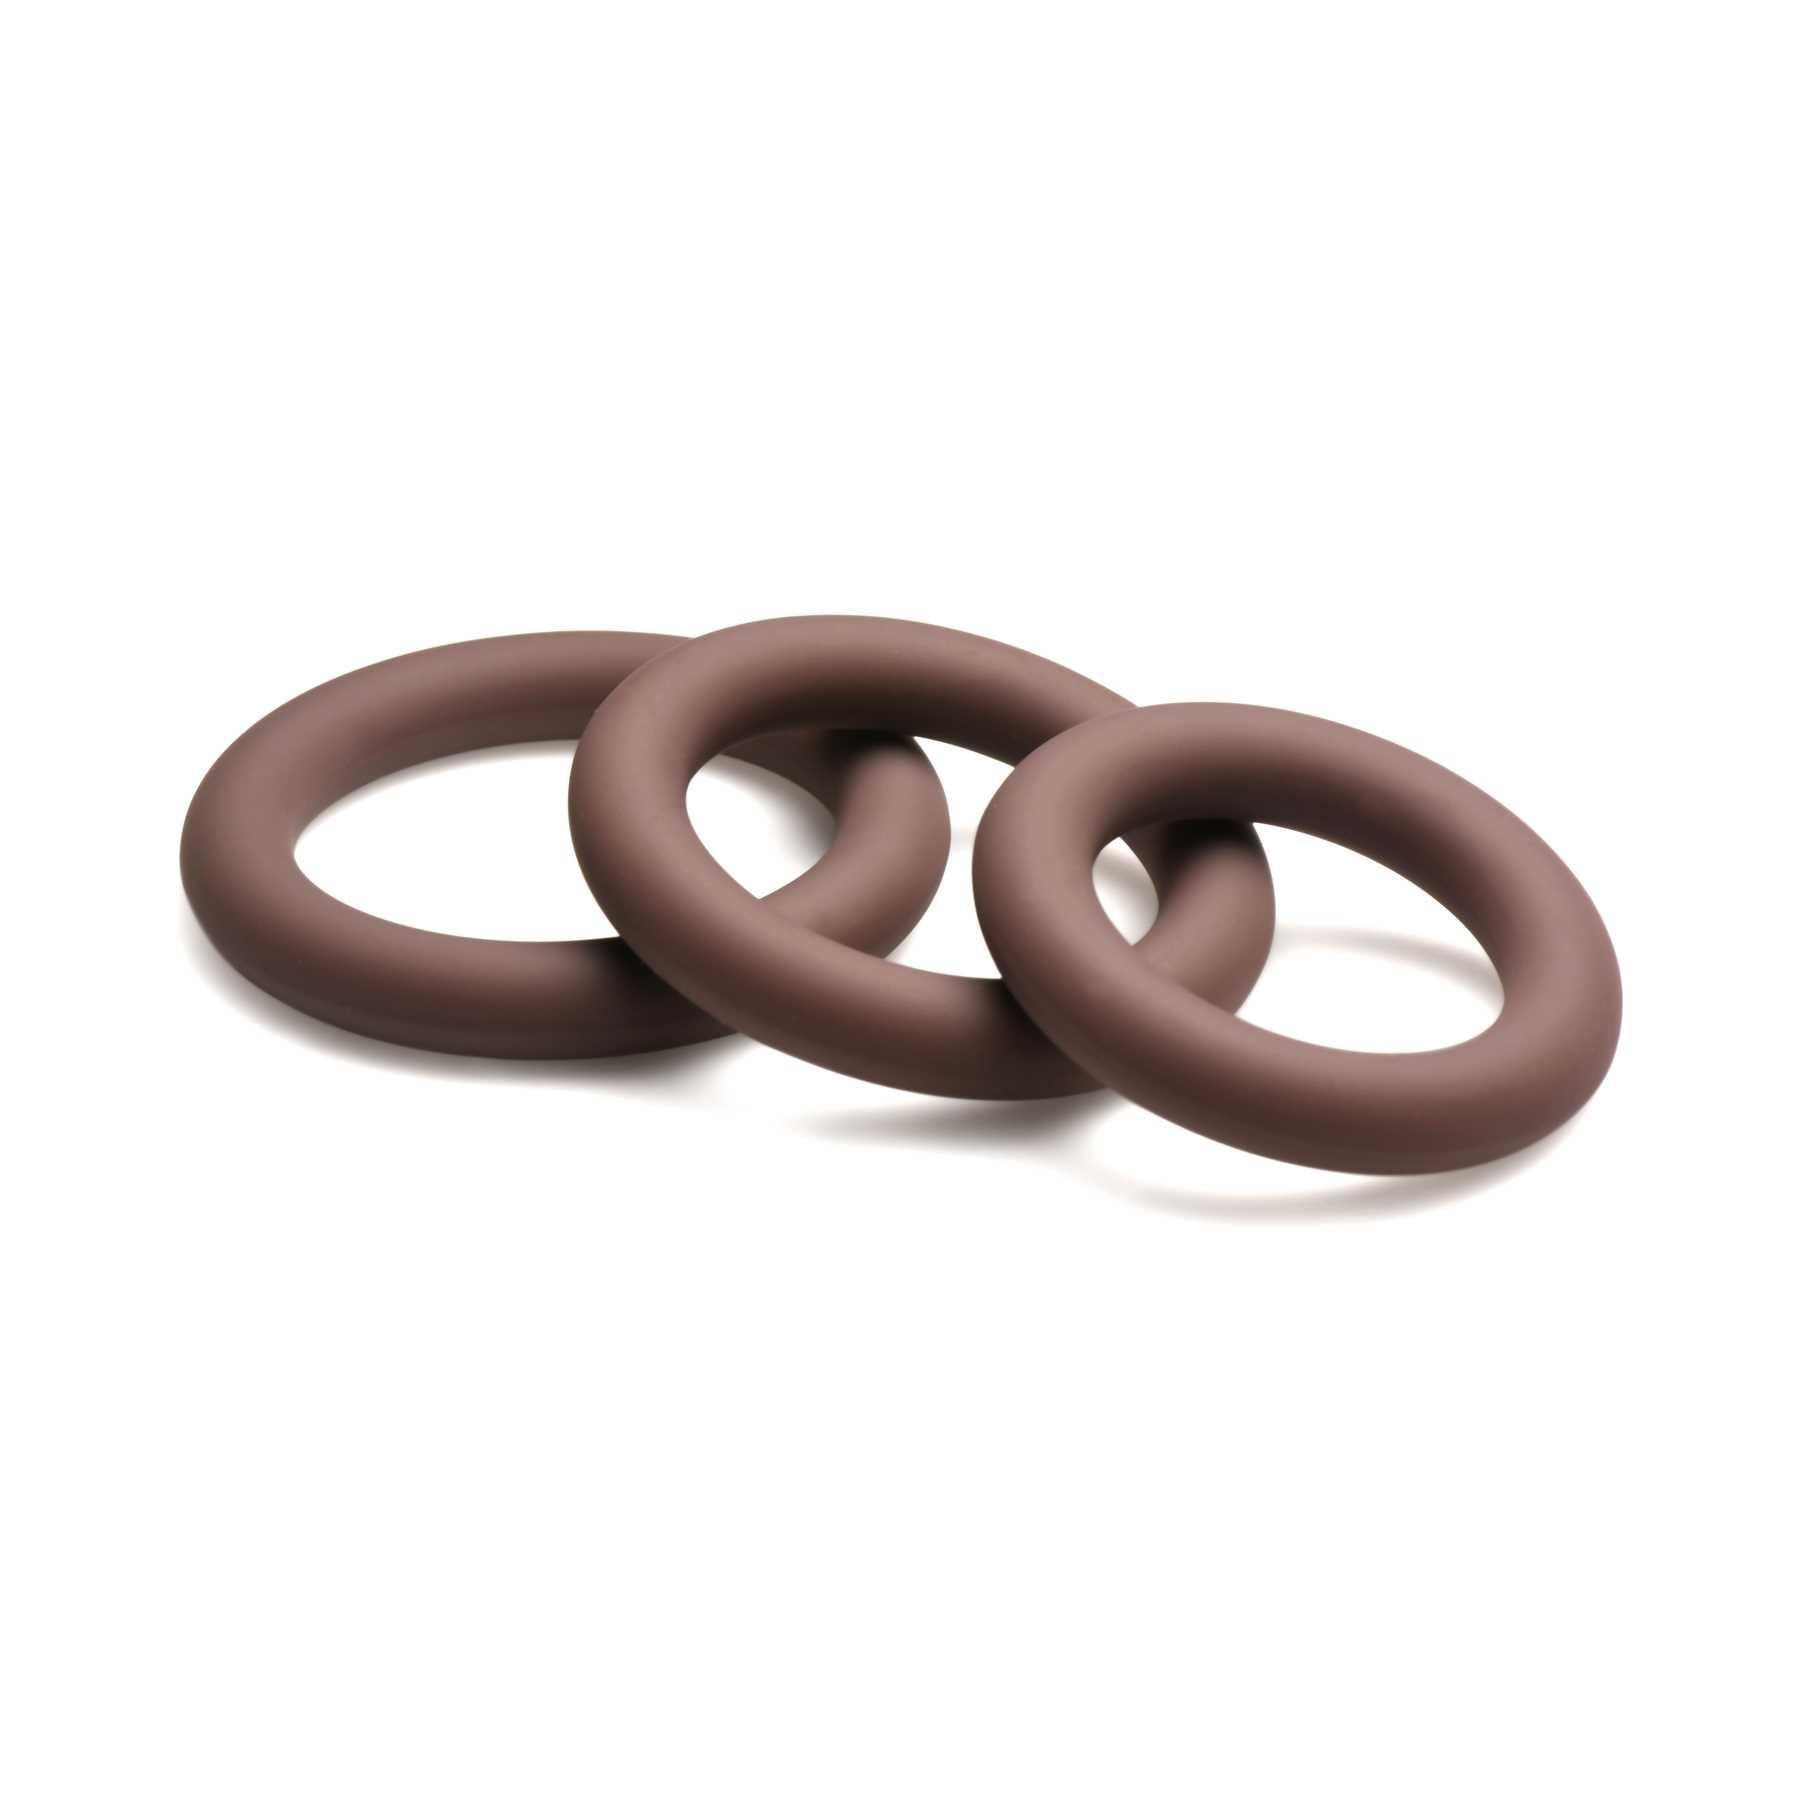 Jock Silicone Cock Ring Set brown 3 rings stacked